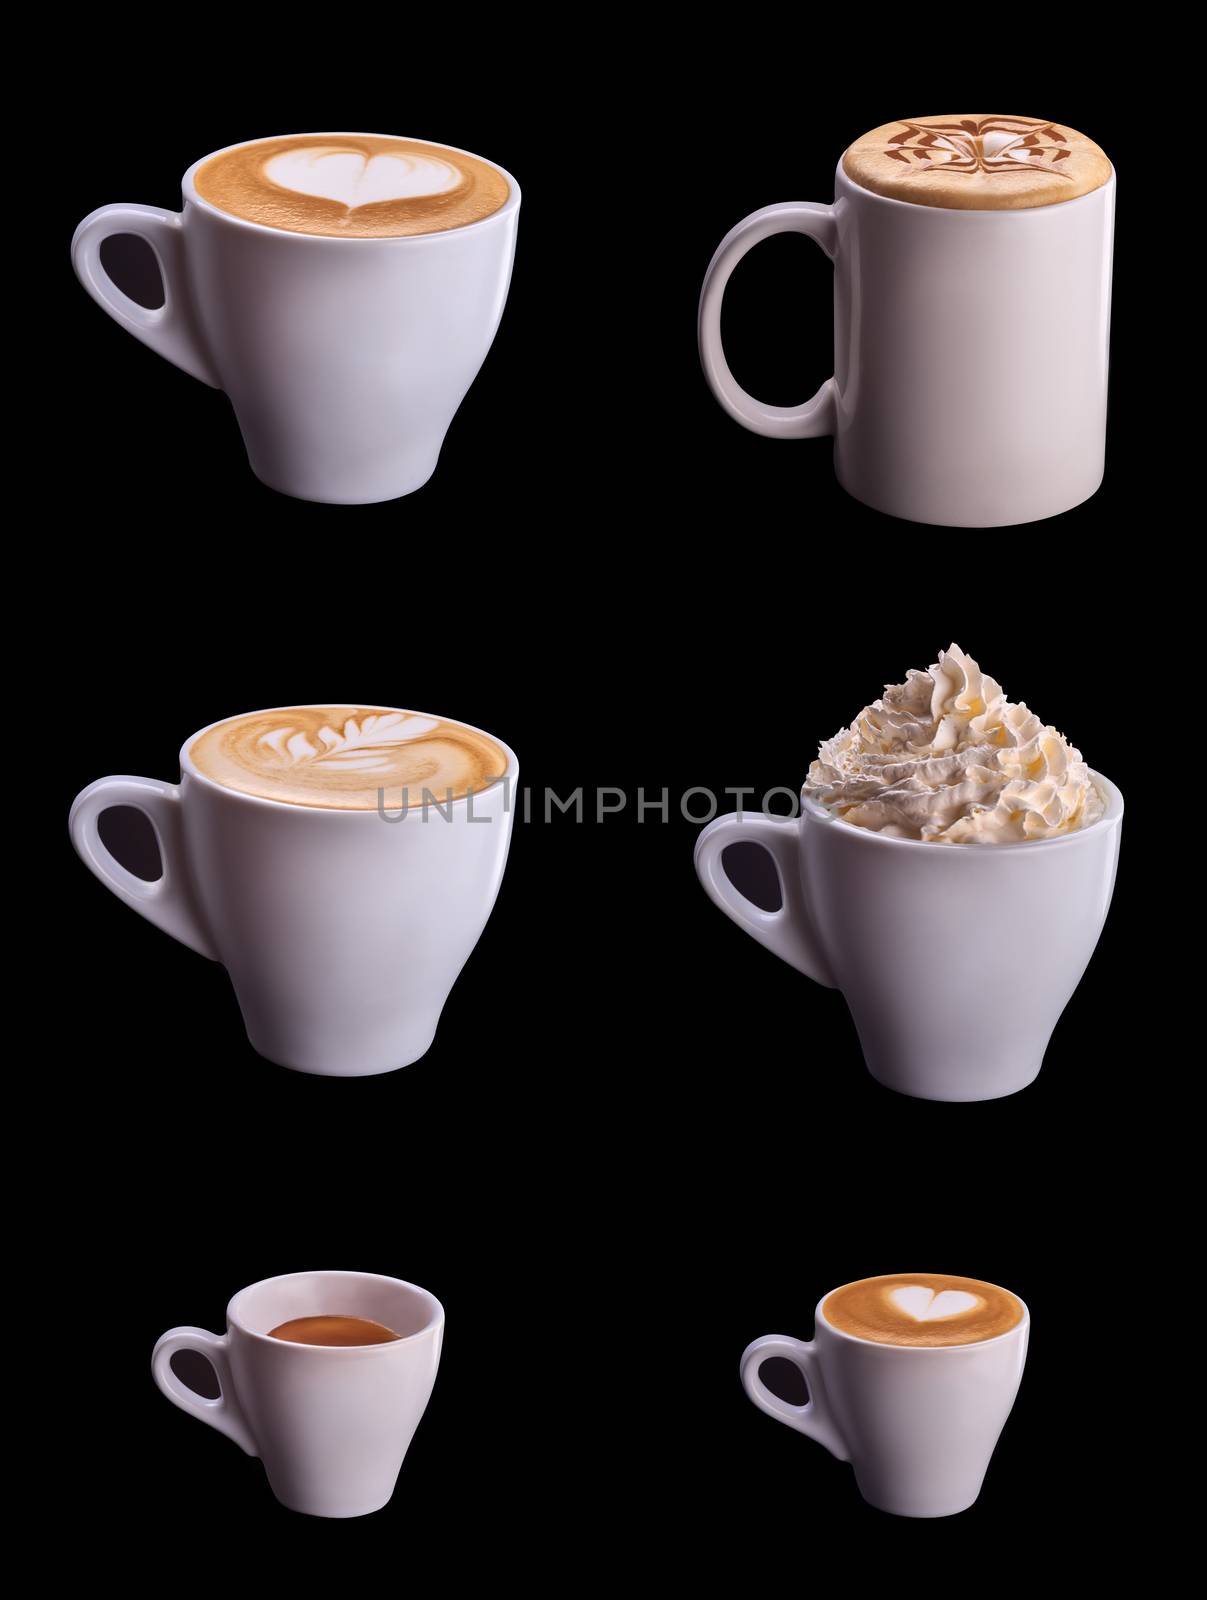 Six coffee cup collage set isolated on black background